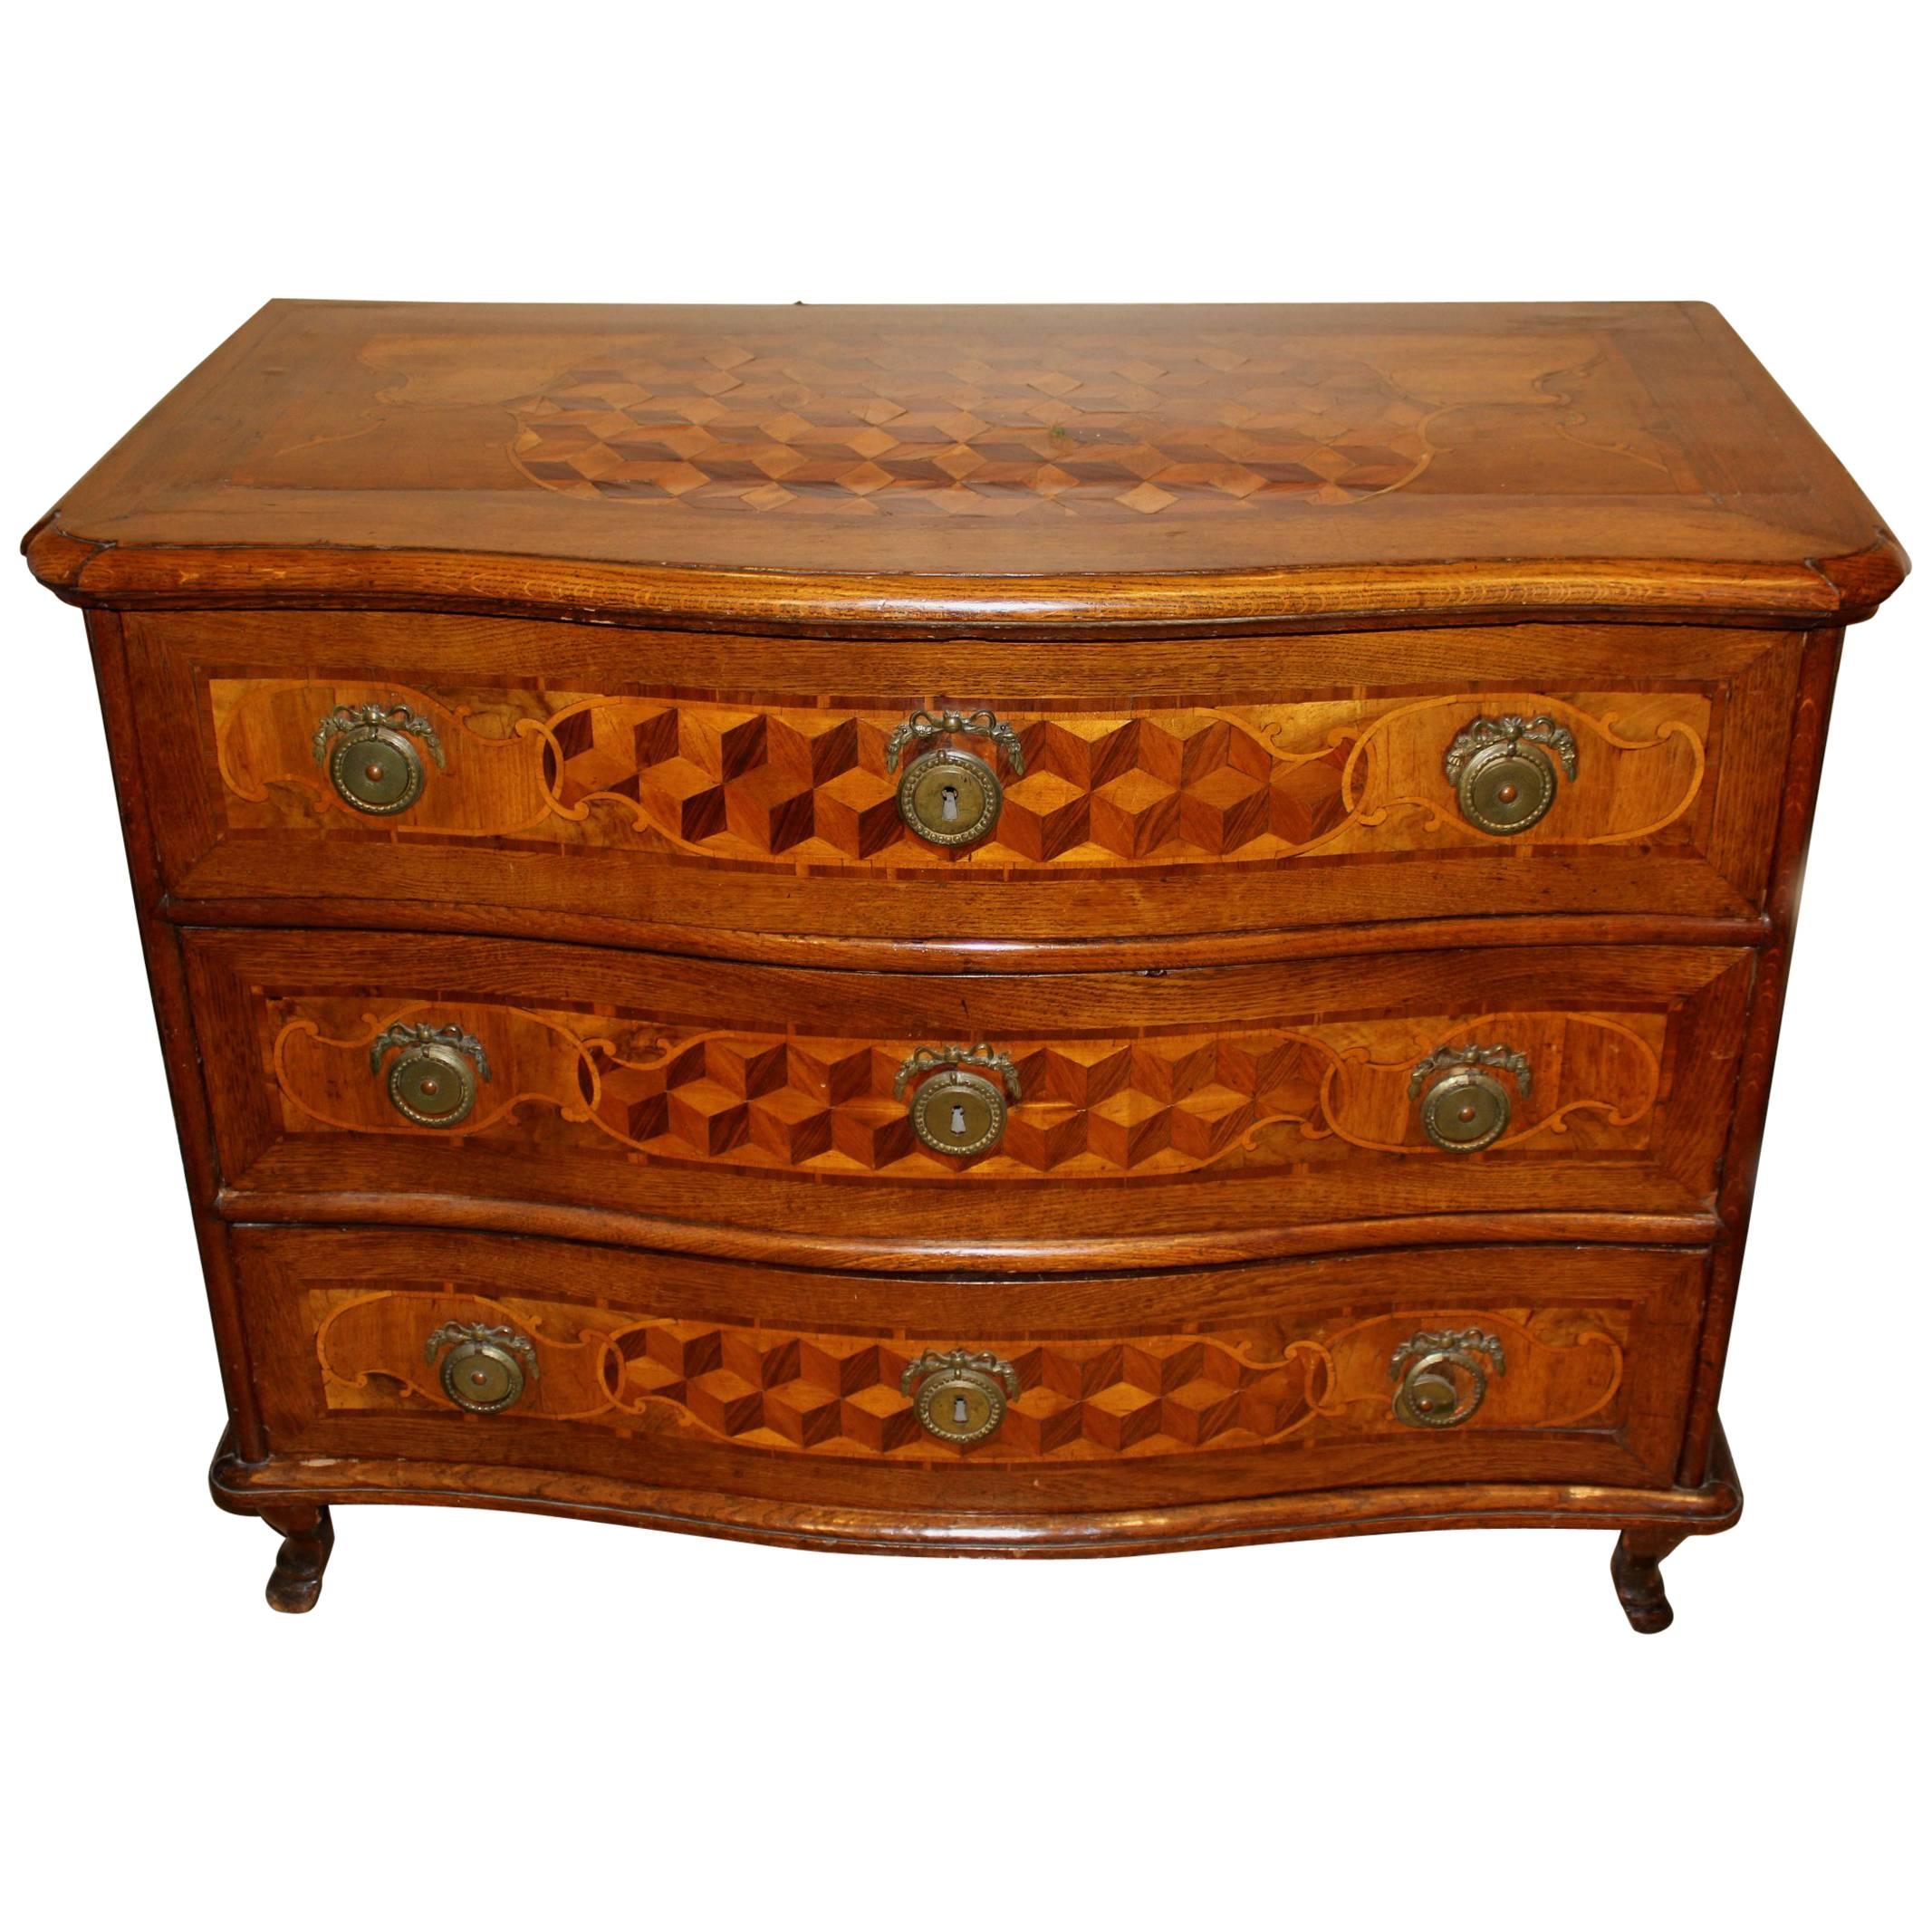 18th c Swiss Rococo Fruitwood Serpentine Commode with Tumbling Block Parquetry For Sale